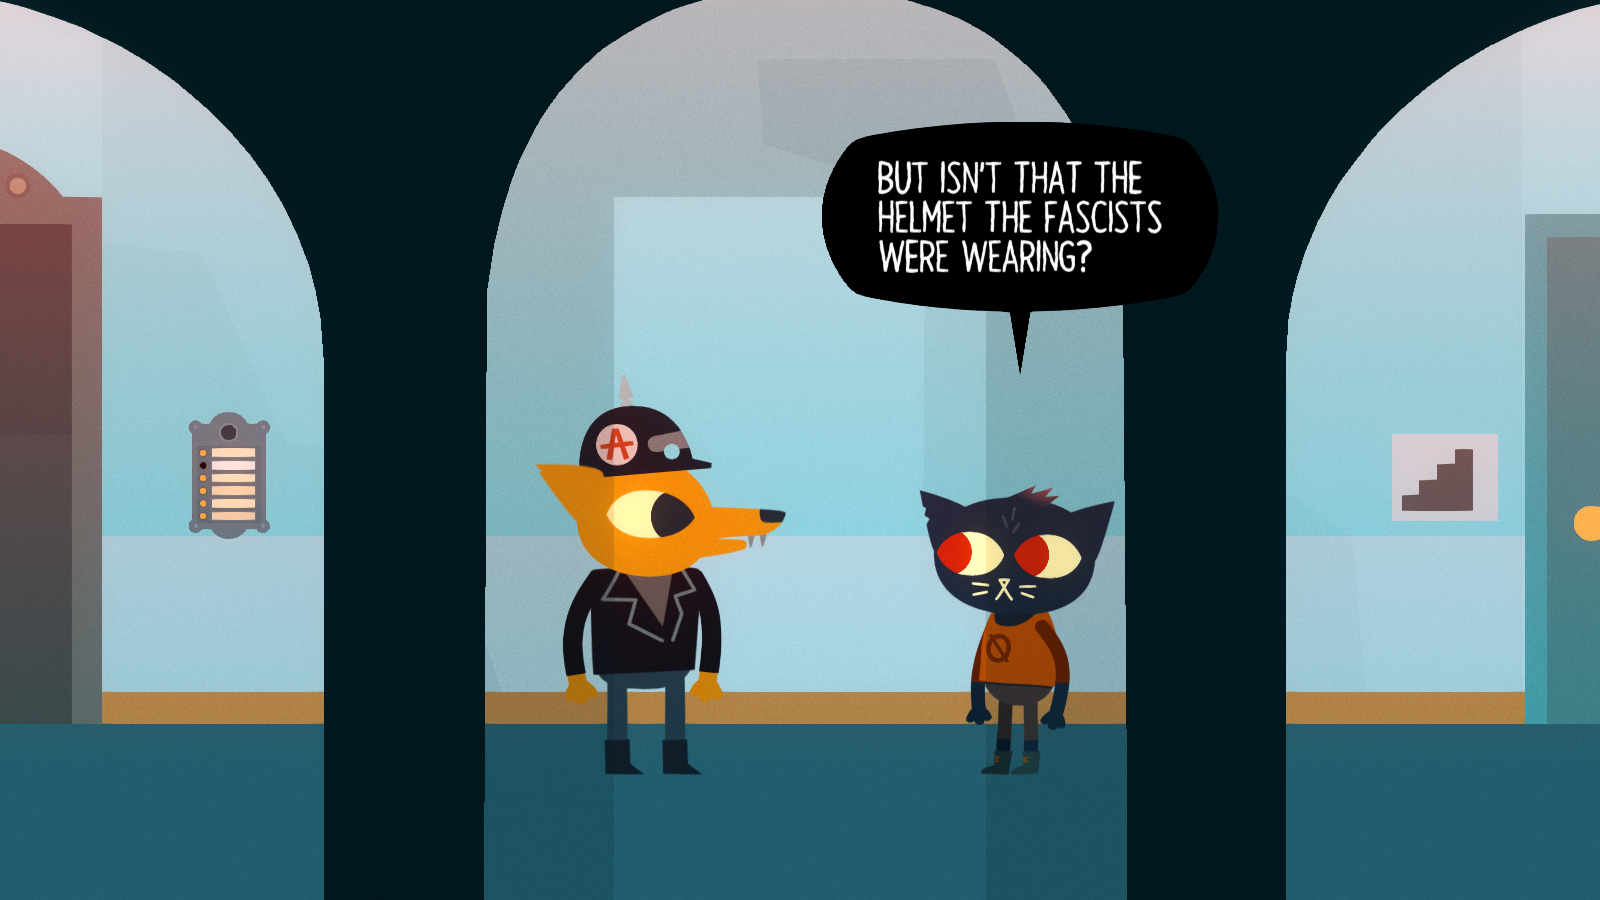 Night in the Woods – Hardcore Gaming 101